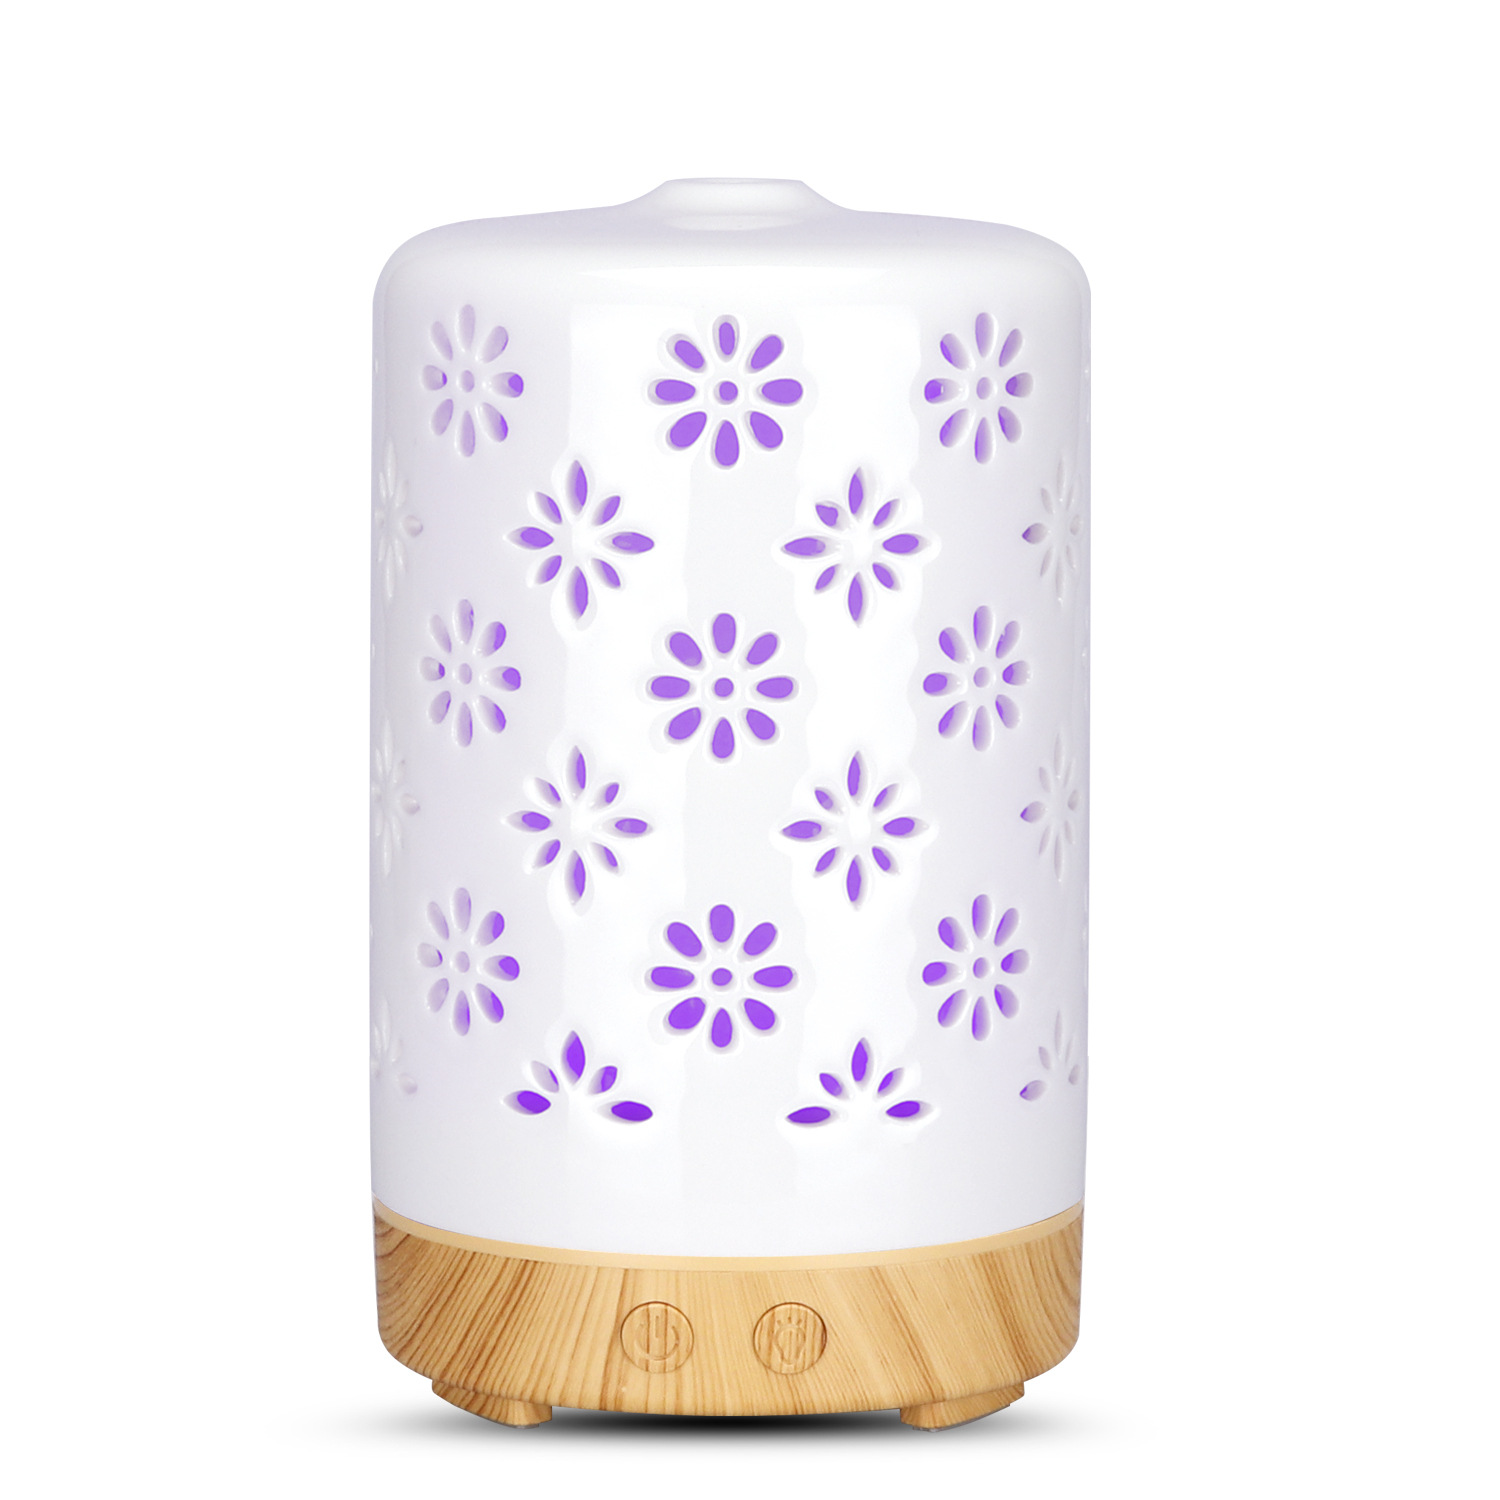 New Arrival China China Hot Gift Essential Oil Set Aroma Diffuser Cool Mist Humidifier with Big Discount Good Quality